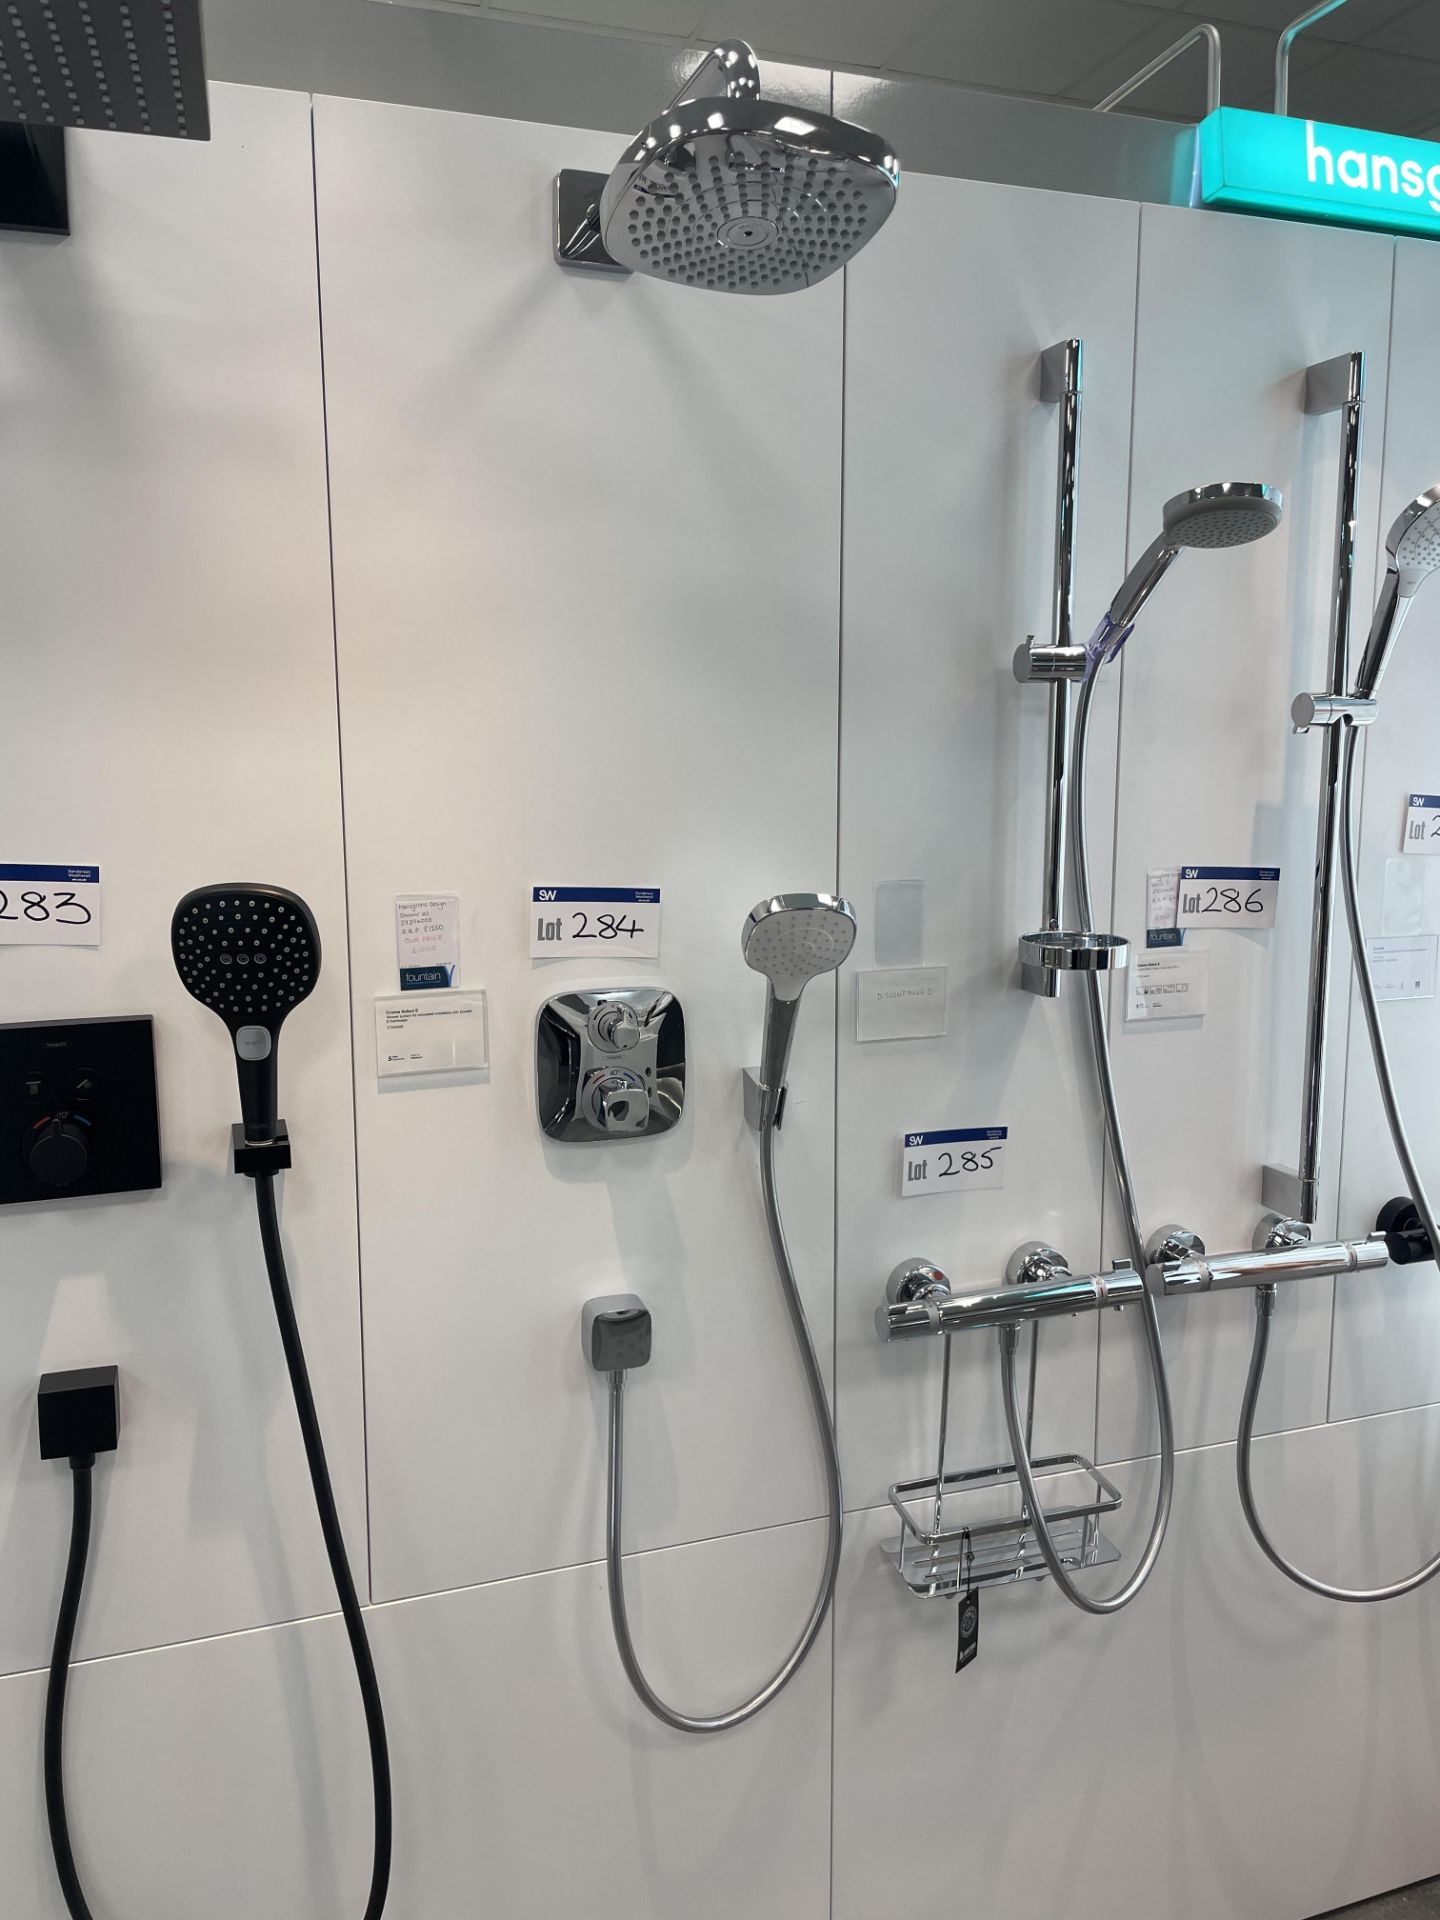 Hansgrohe Design Shower System (understood to be a display unit and may not be complete - inspection